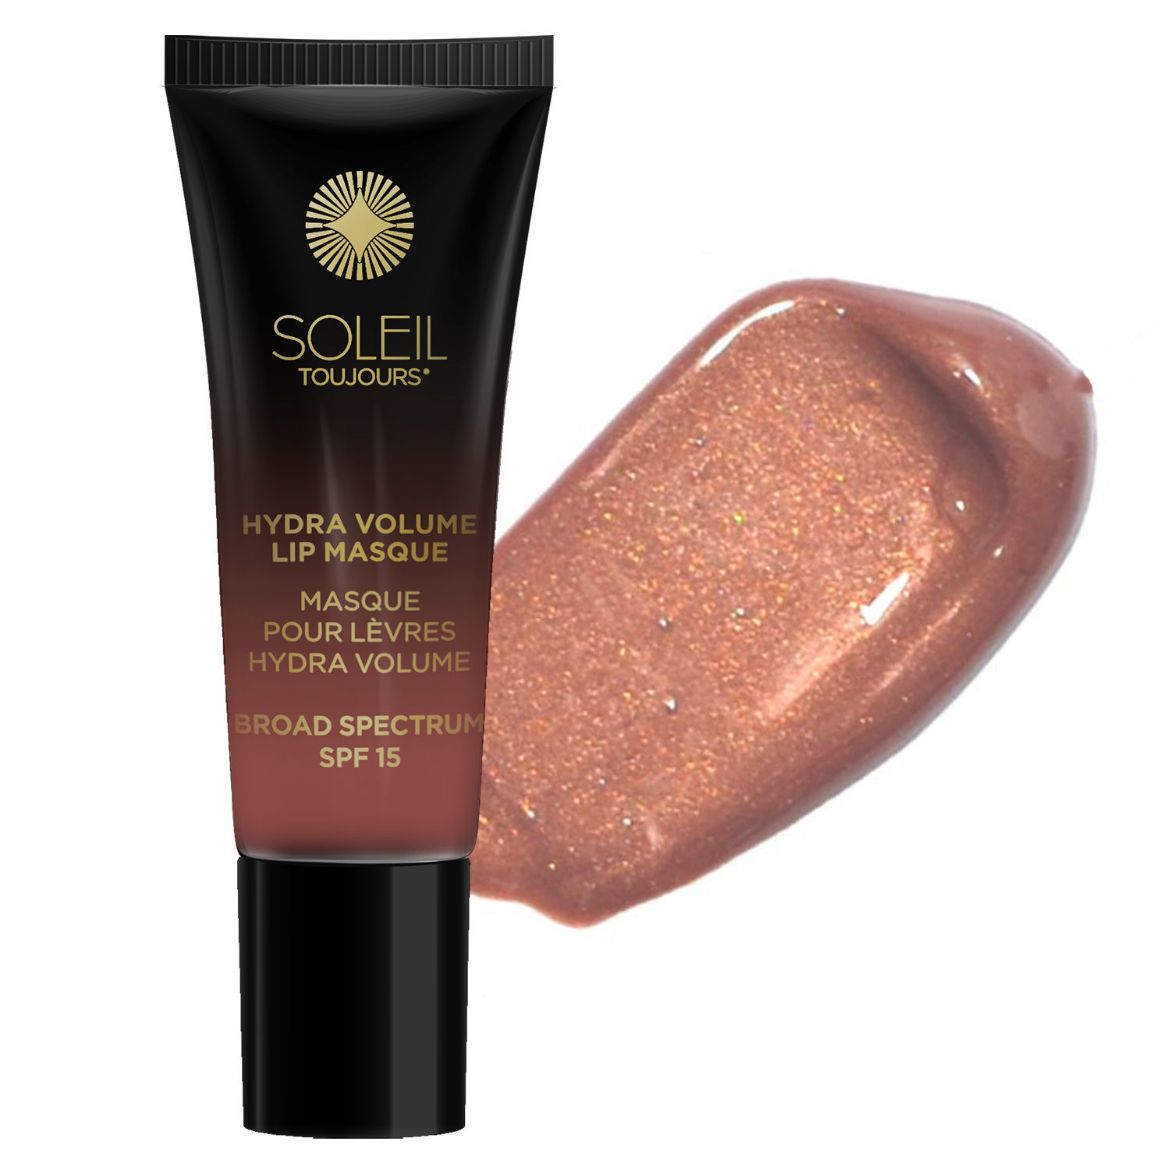 Image of Soleil Toujours Mineral Hydra Volume Lip Masque SPF 15 - Fontelina (10ml)